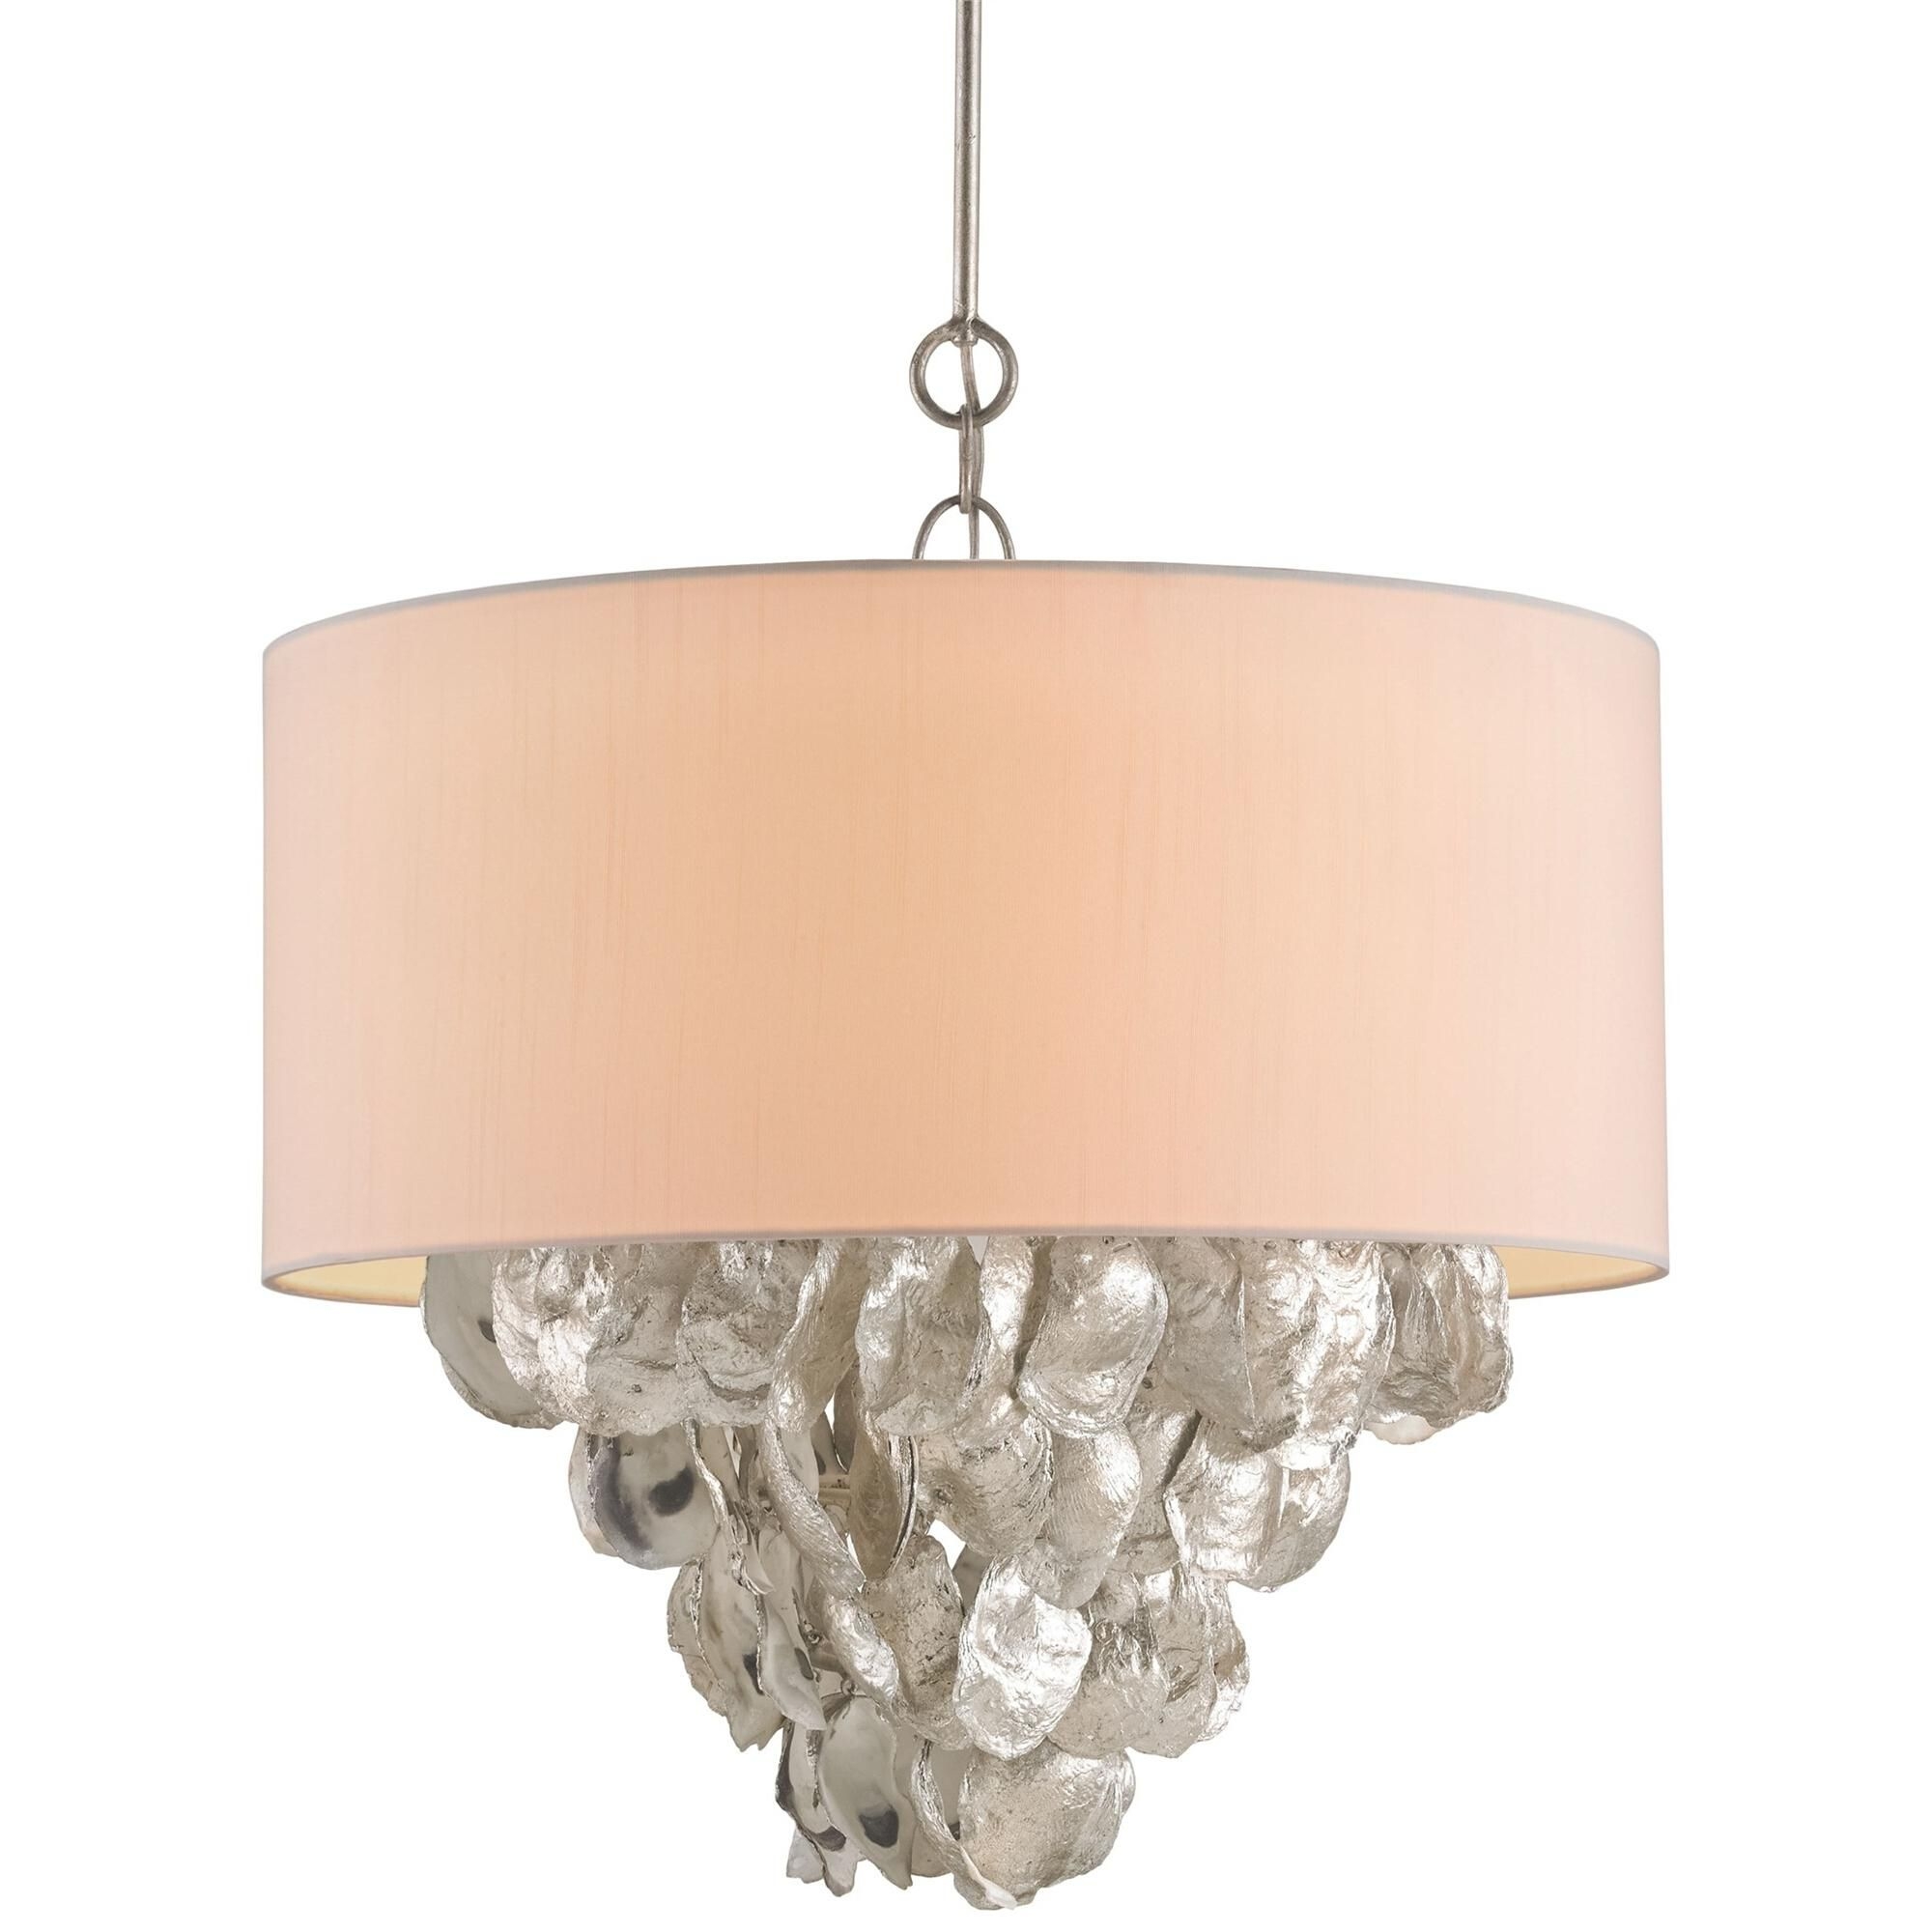 Oyster shell chandelier 36